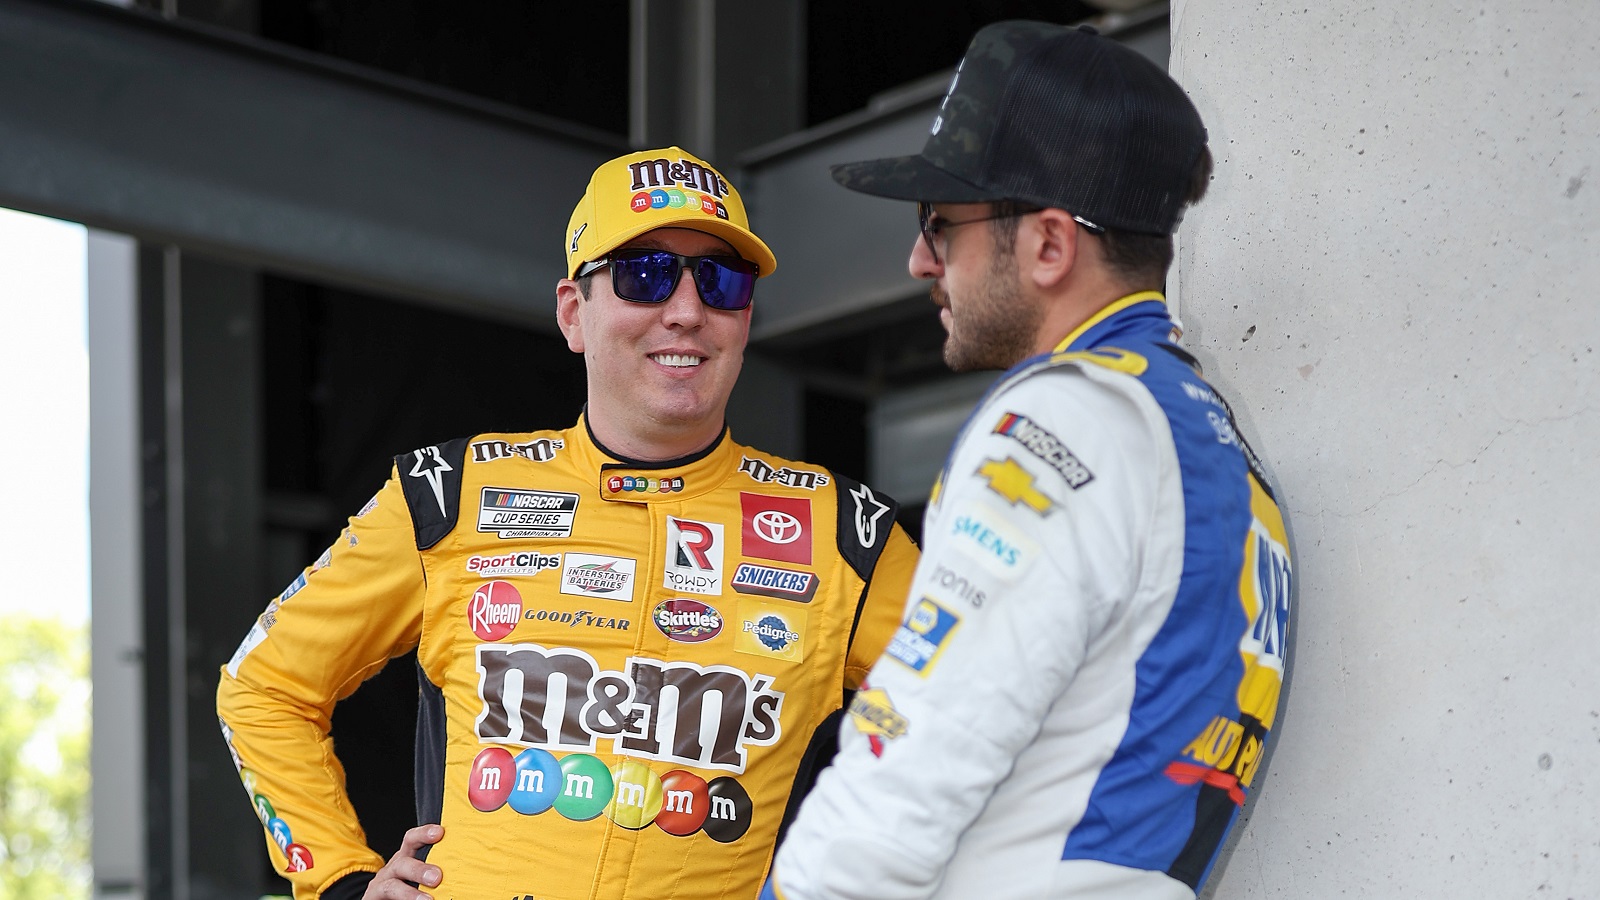 Kyle Busch and Chase Elliott talk prior to the NASCAR Cup Series Verizon 200 at the Brickyard at Indianapolis Motor Speedway on July 31, 2022. | | James Gilbert/Getty Images